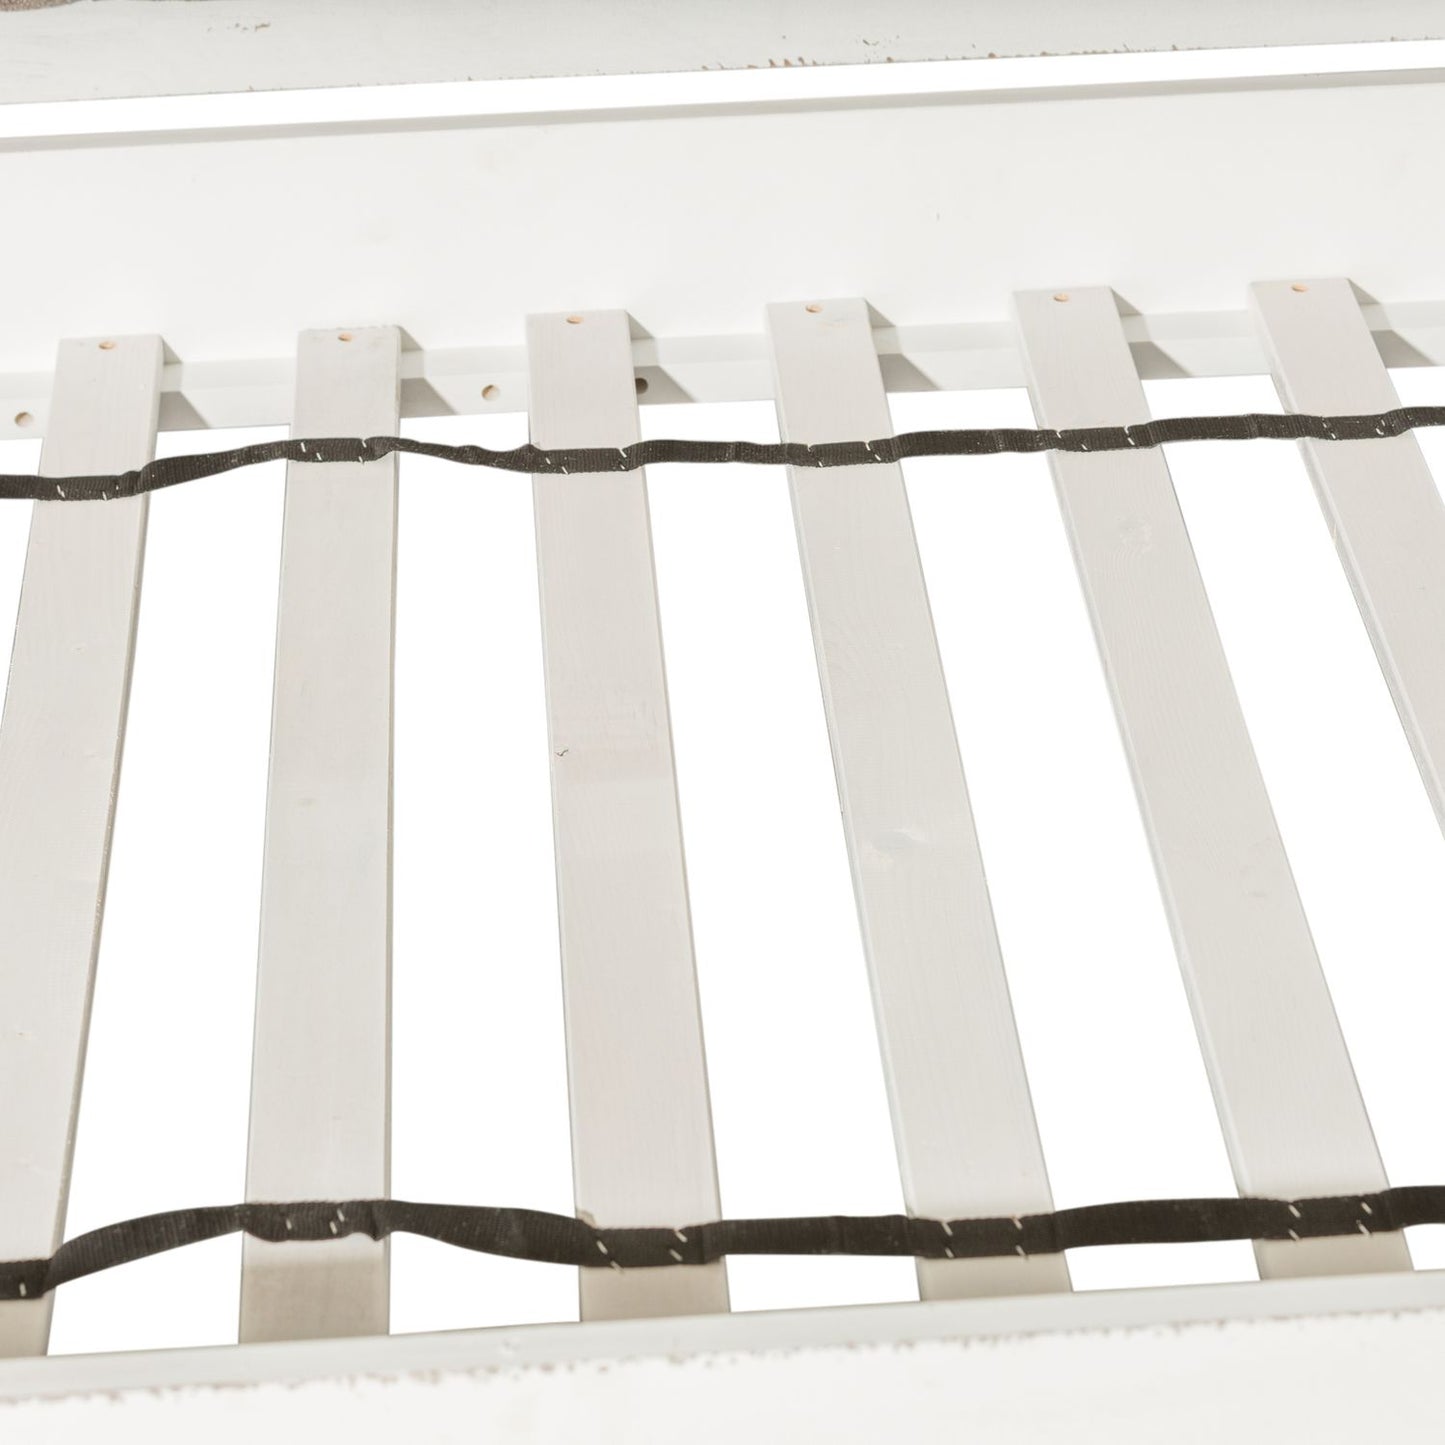 Magnolia Manor - Twin Daybed Slat Roll